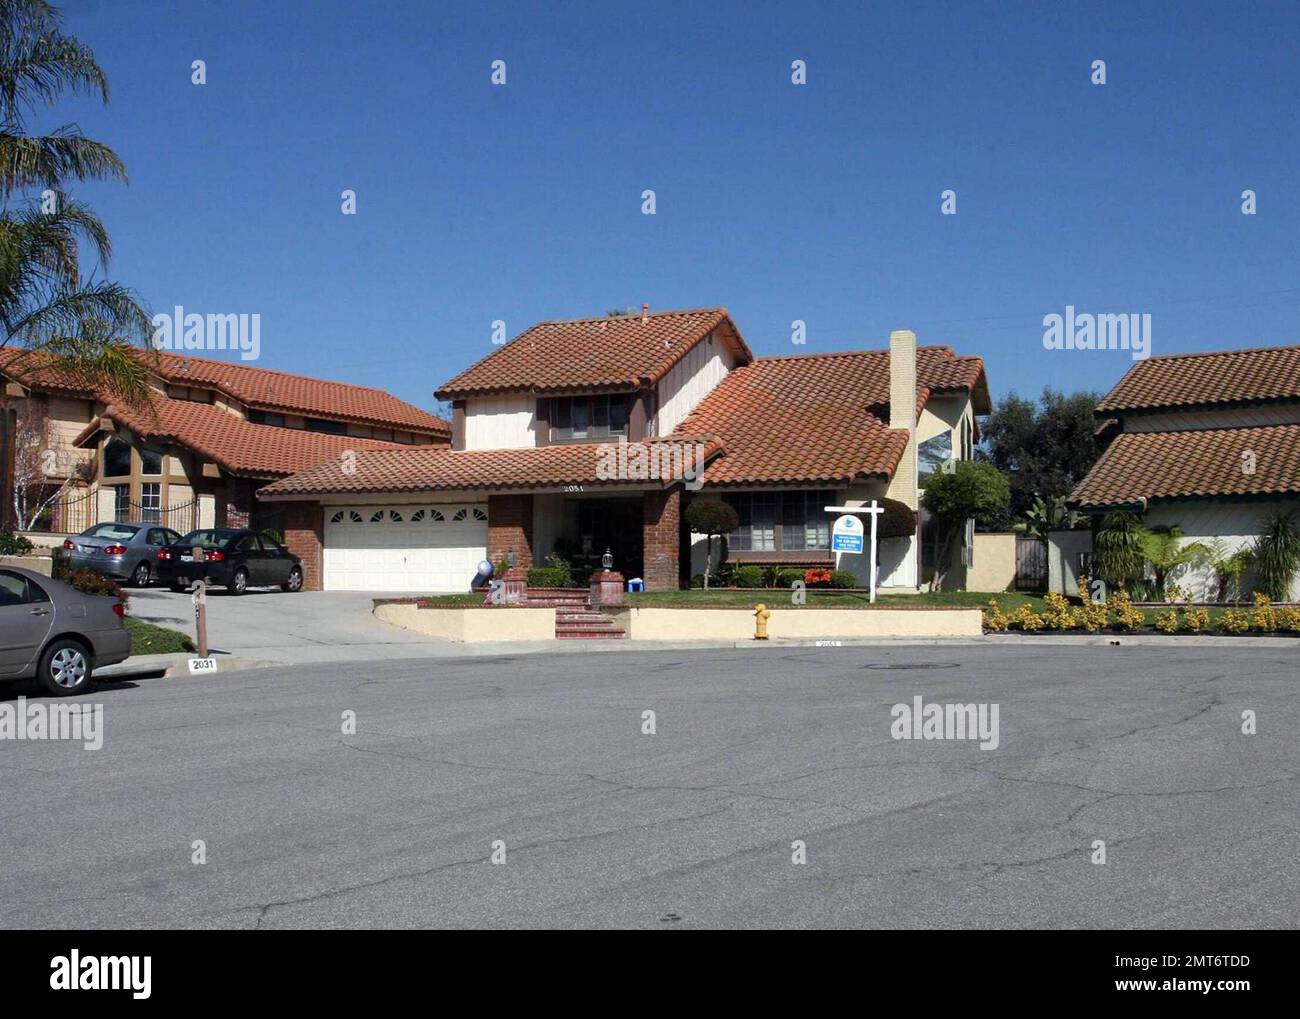 https://c8.alamy.com/comp/2MT6TDD/this-is-the-new-house-purchased-for-nadya-suleman-the-mother-of-newborn-octuplets-the-home-located-at-the-end-of-a-small-culdesac-was-reportedly-purchased-by-her-father-the-home-was-listed-for-564900-by-prudential-realty-members-of-the-media-were-present-all-day-upon-learning-of-the-house-la-habra-ca-31009-2MT6TDD.jpg